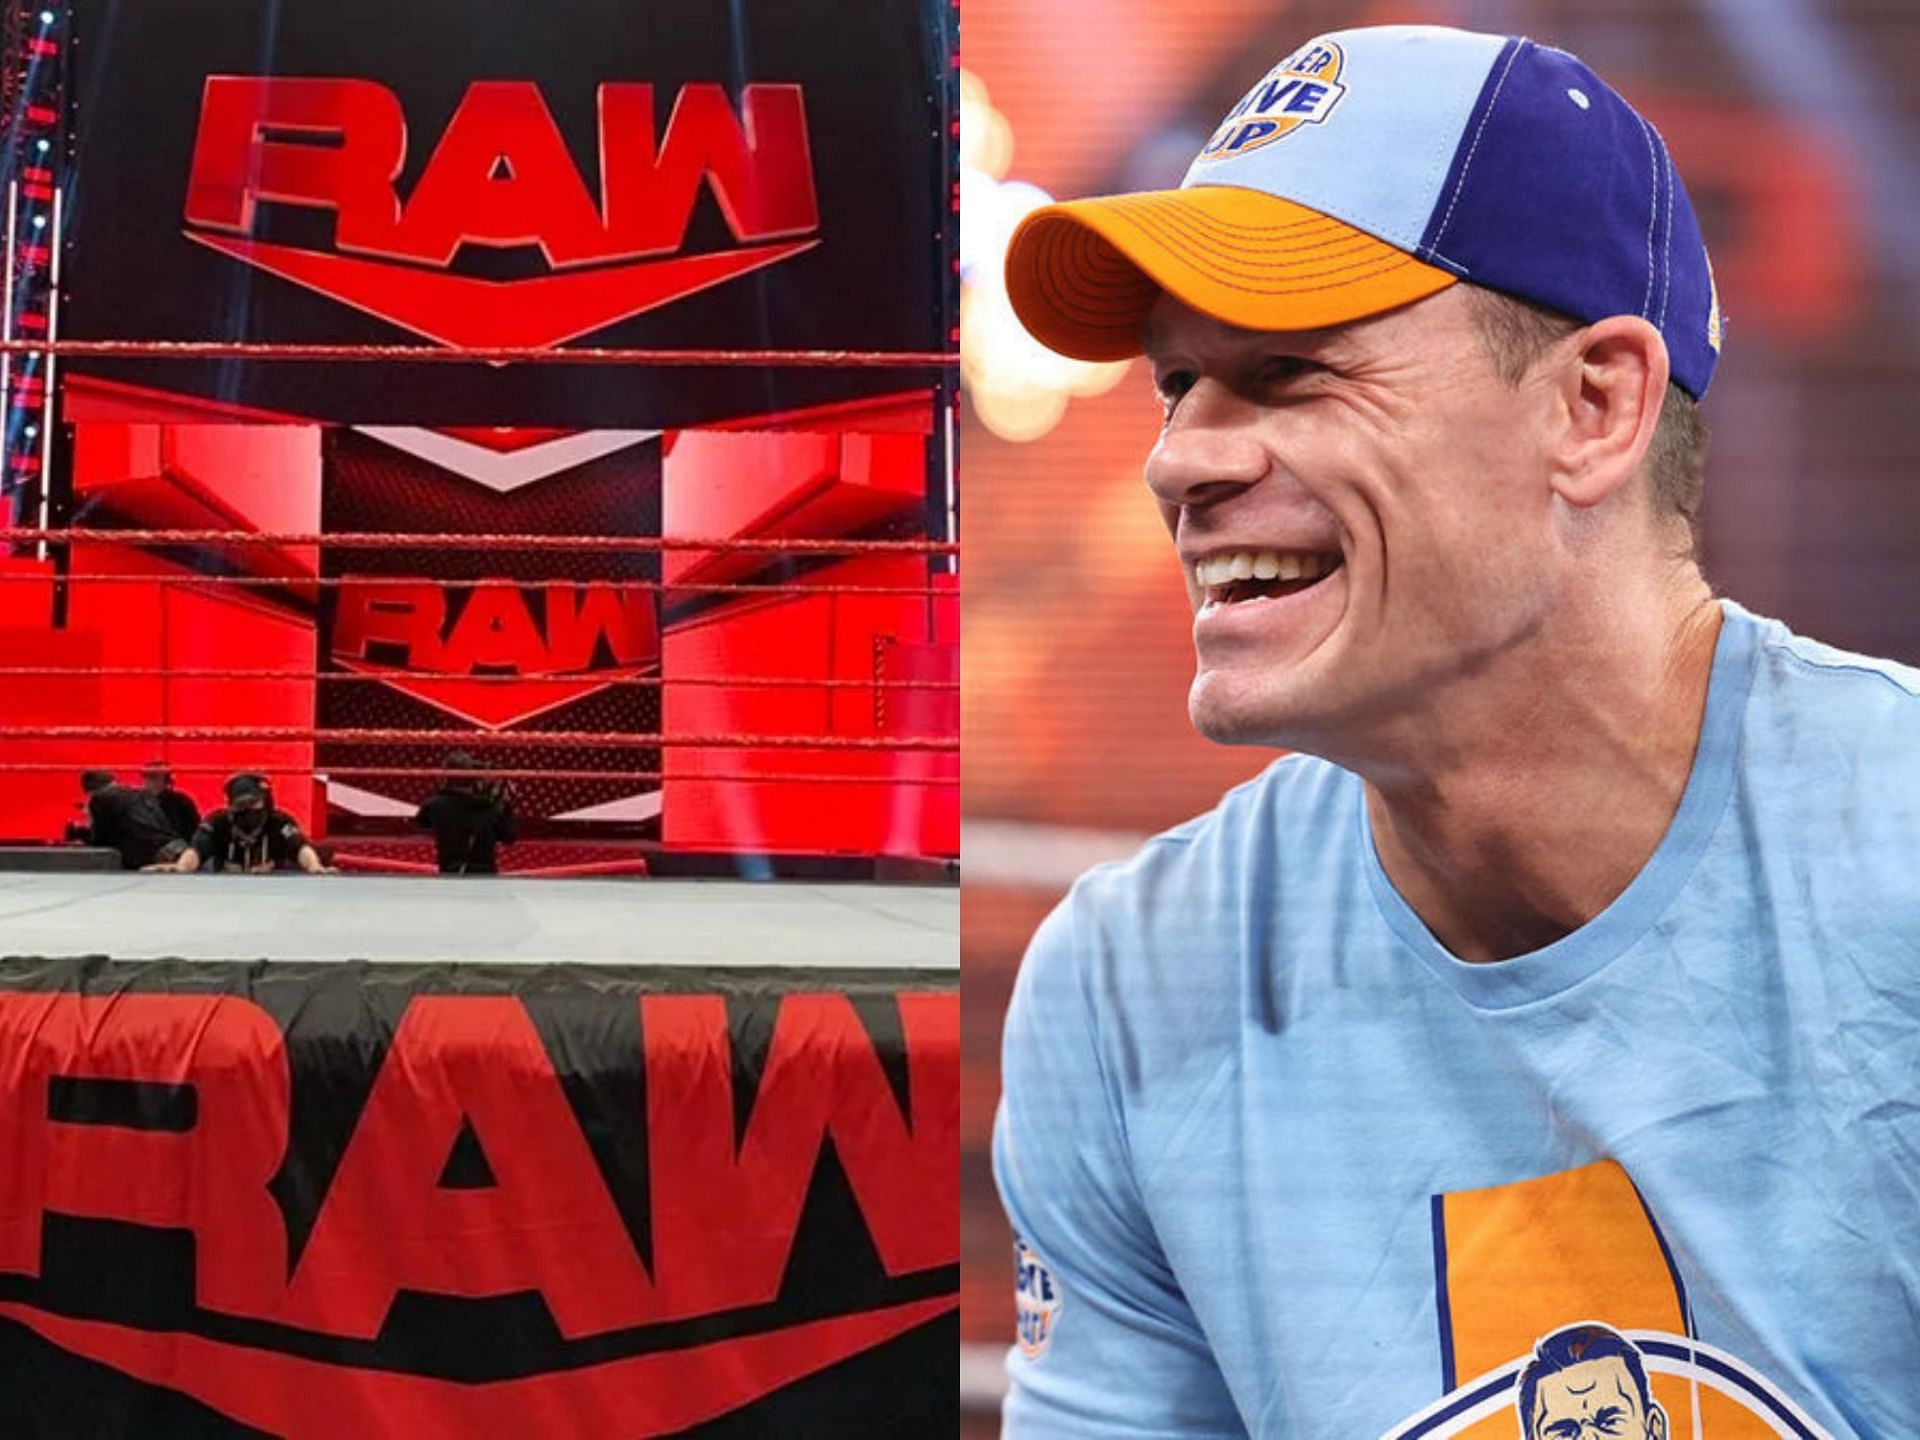 John Cena opened up about his behind the scenes relationship with a former rival